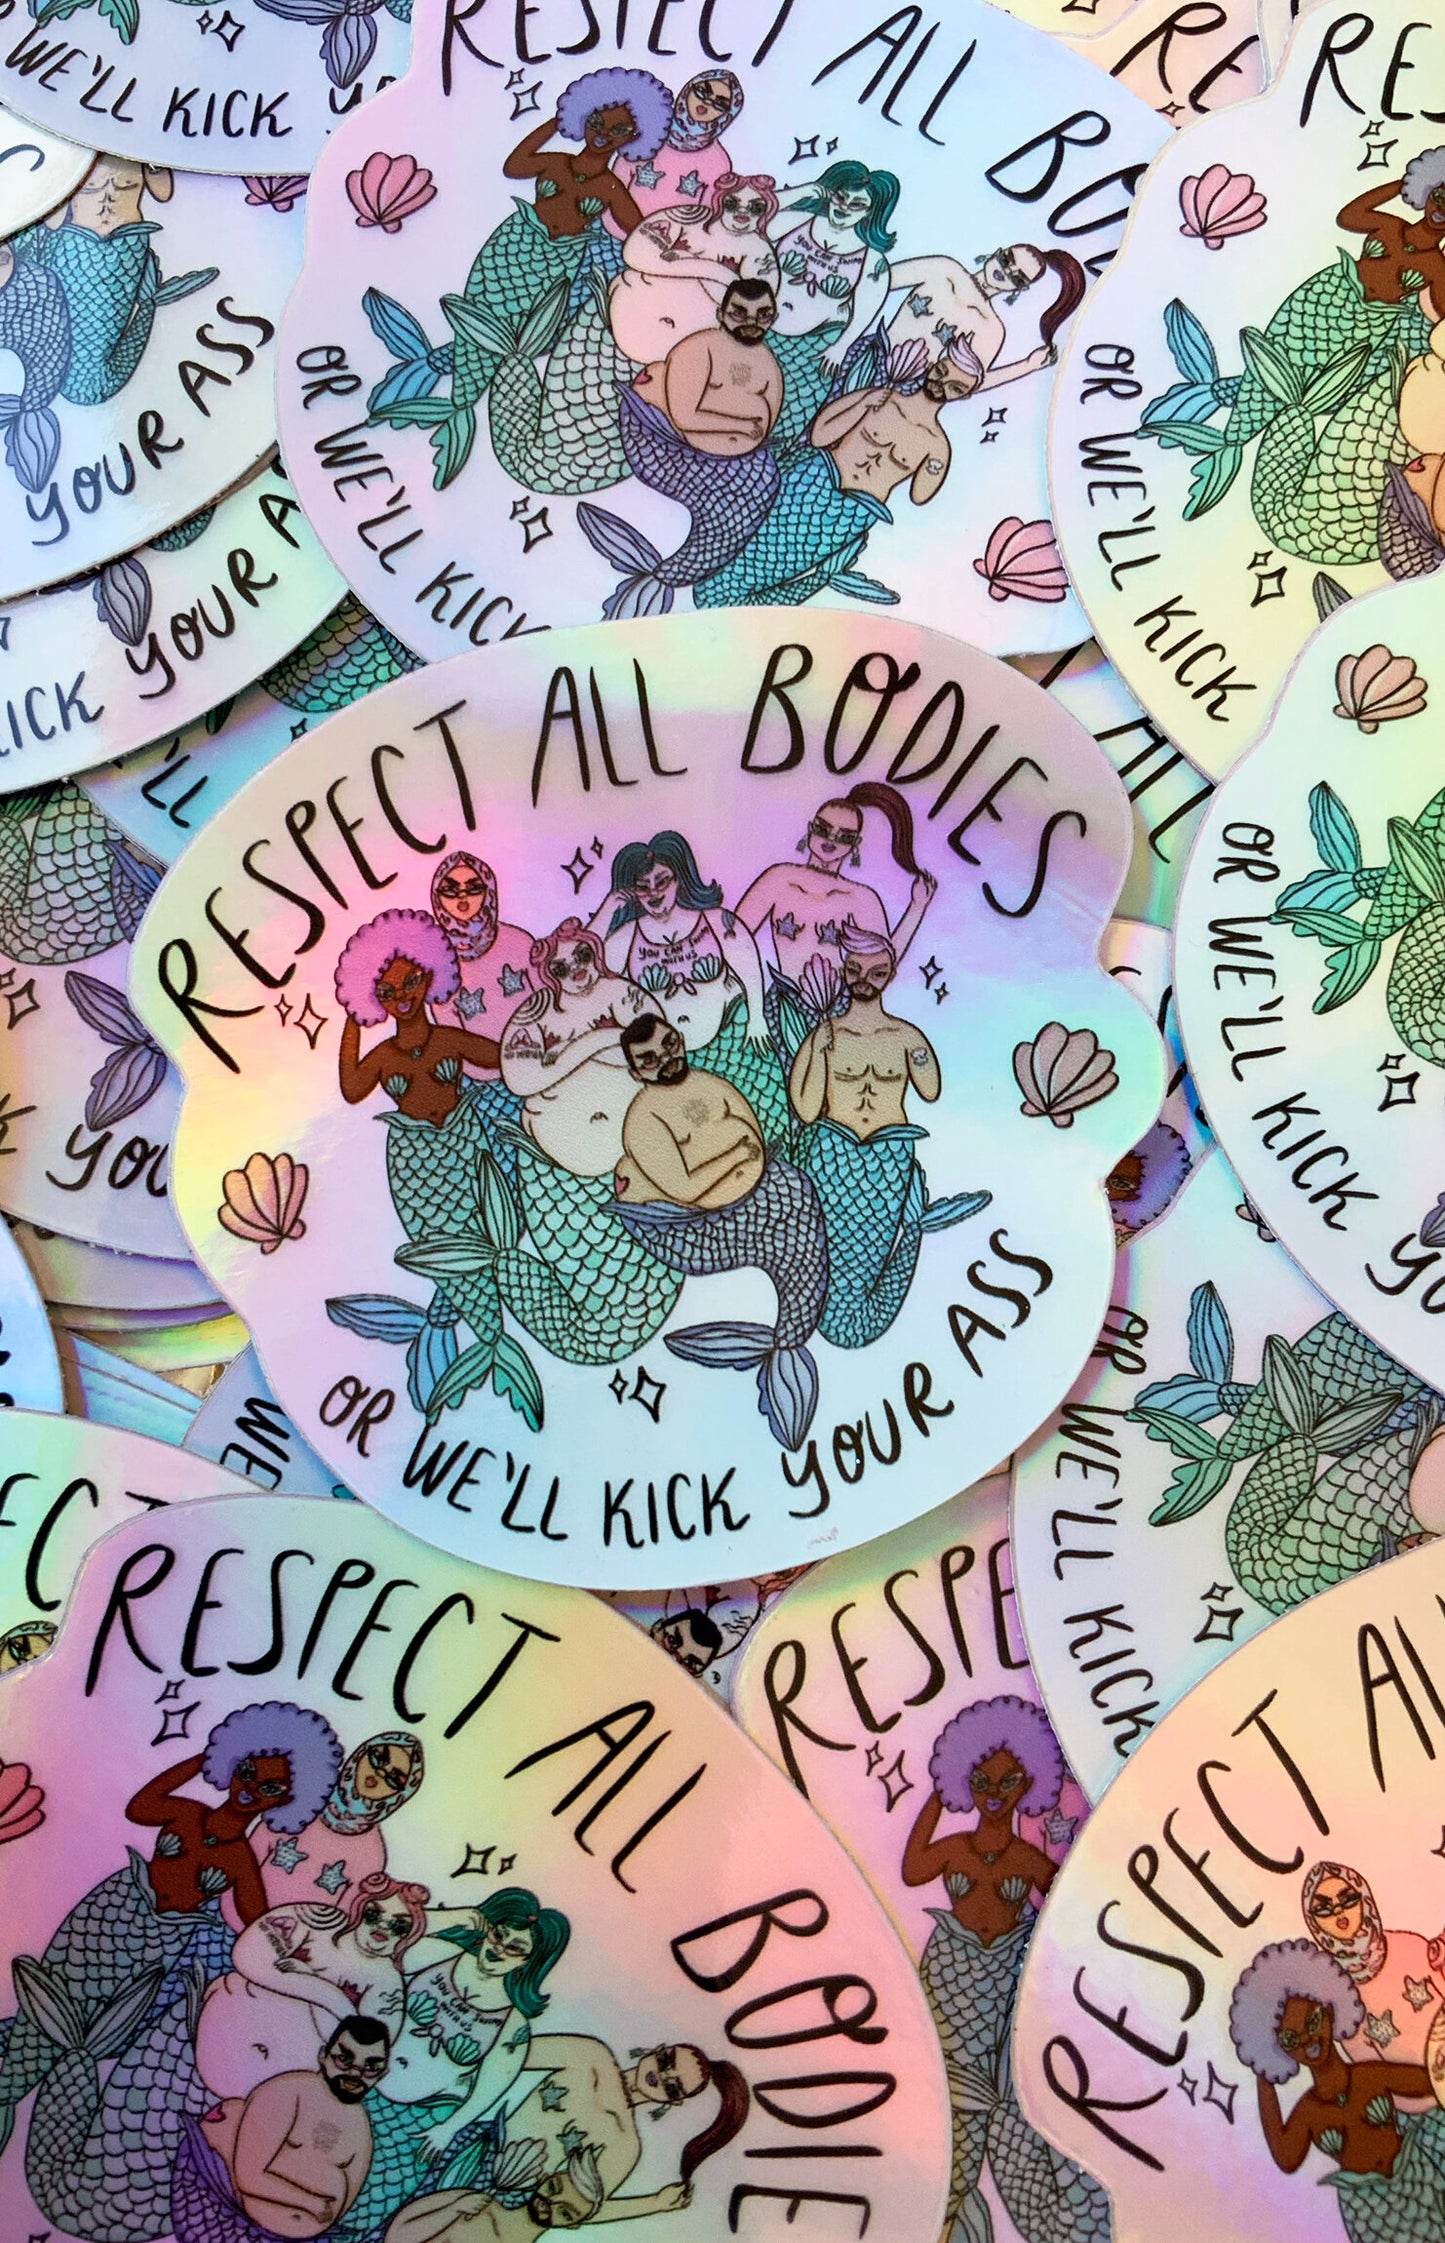 Body positive mermaids - Holographic sticker